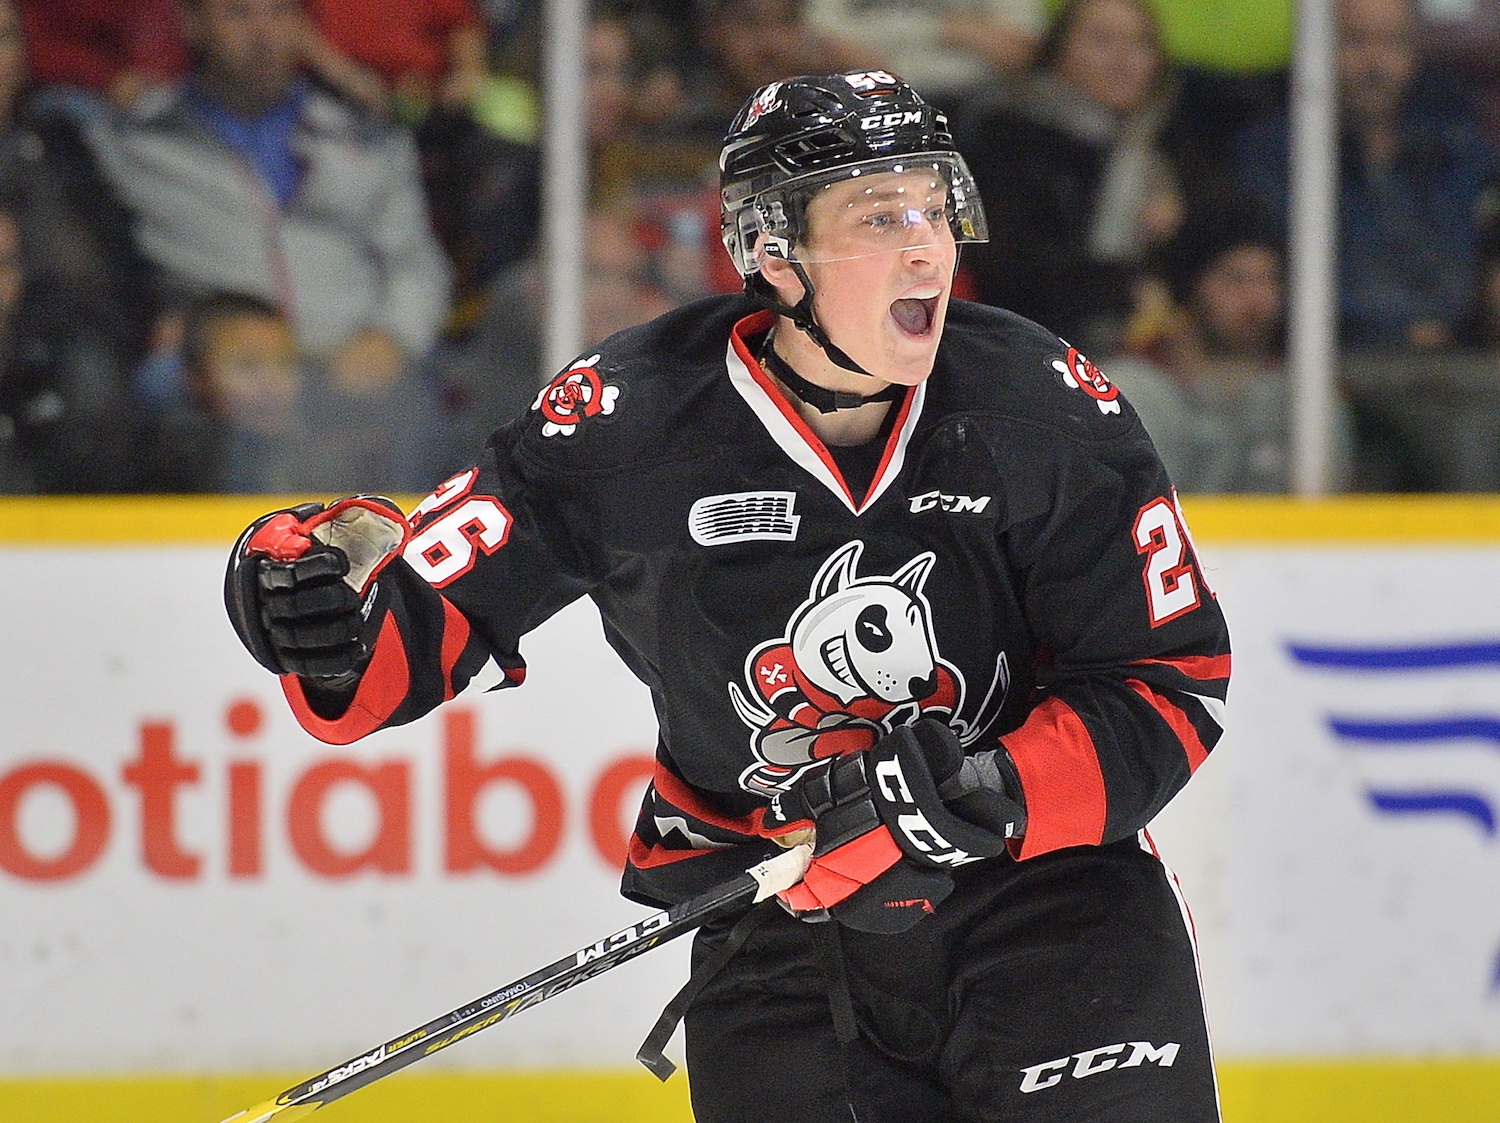 OHL's Niagara IceDogs to pay $150,000 fine for violating recruitment rules  – but major junior has bigger problems - The Hockey News